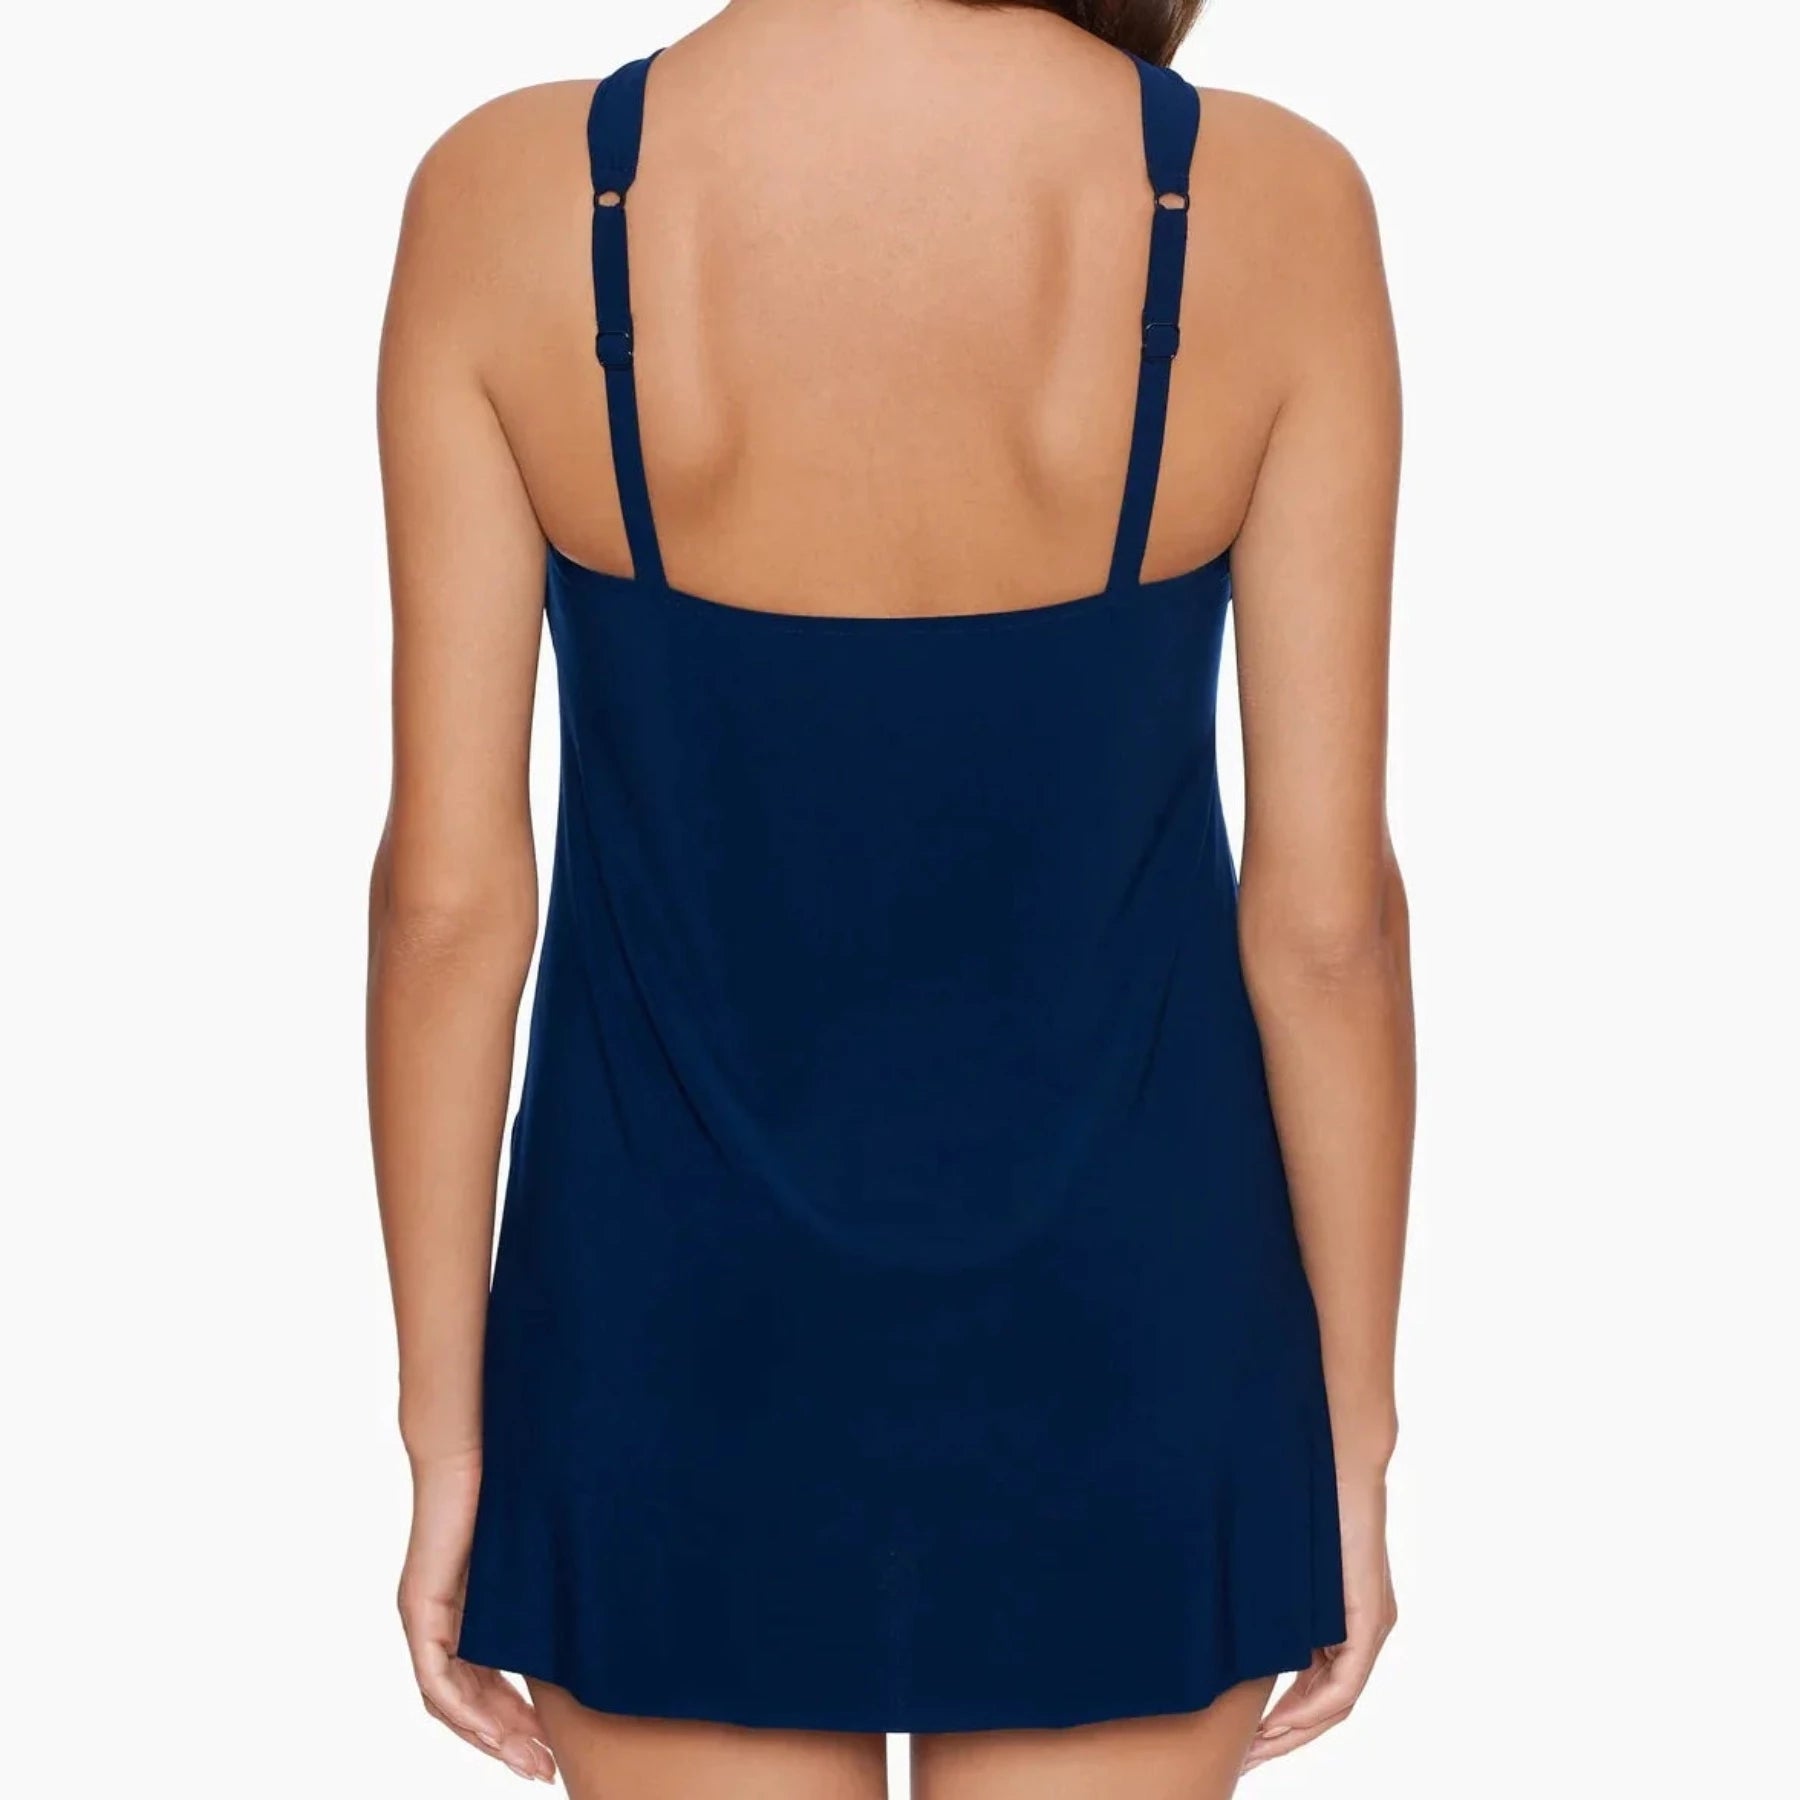 Square Cut Beverly One Piece Swimsuit 6006096 - Navy